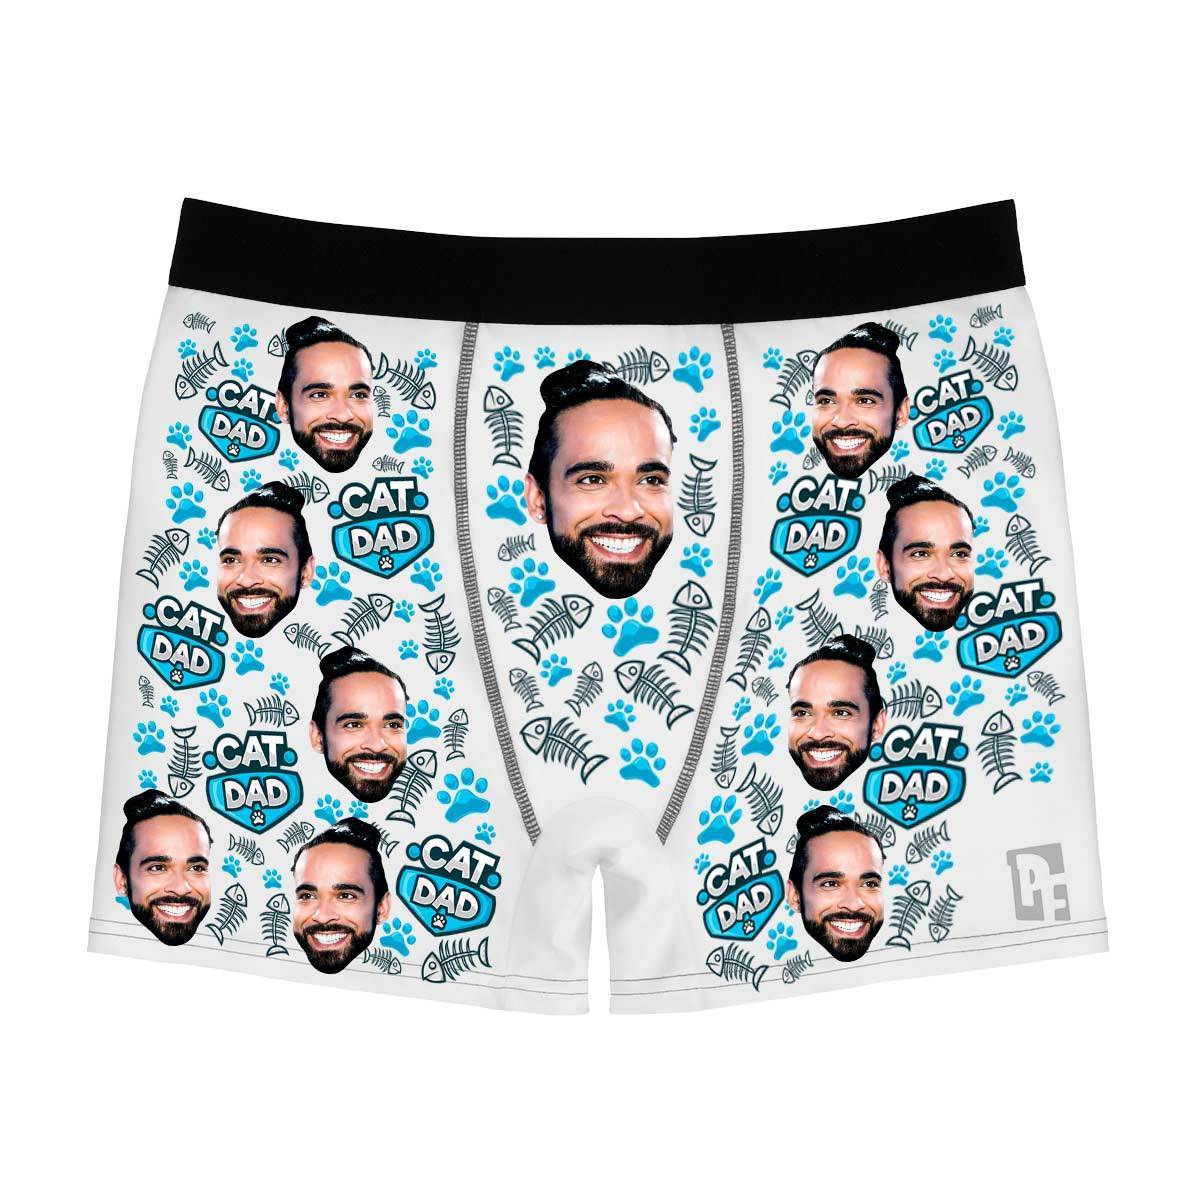 White Cat dad men's boxer briefs personalized with photo printed on them